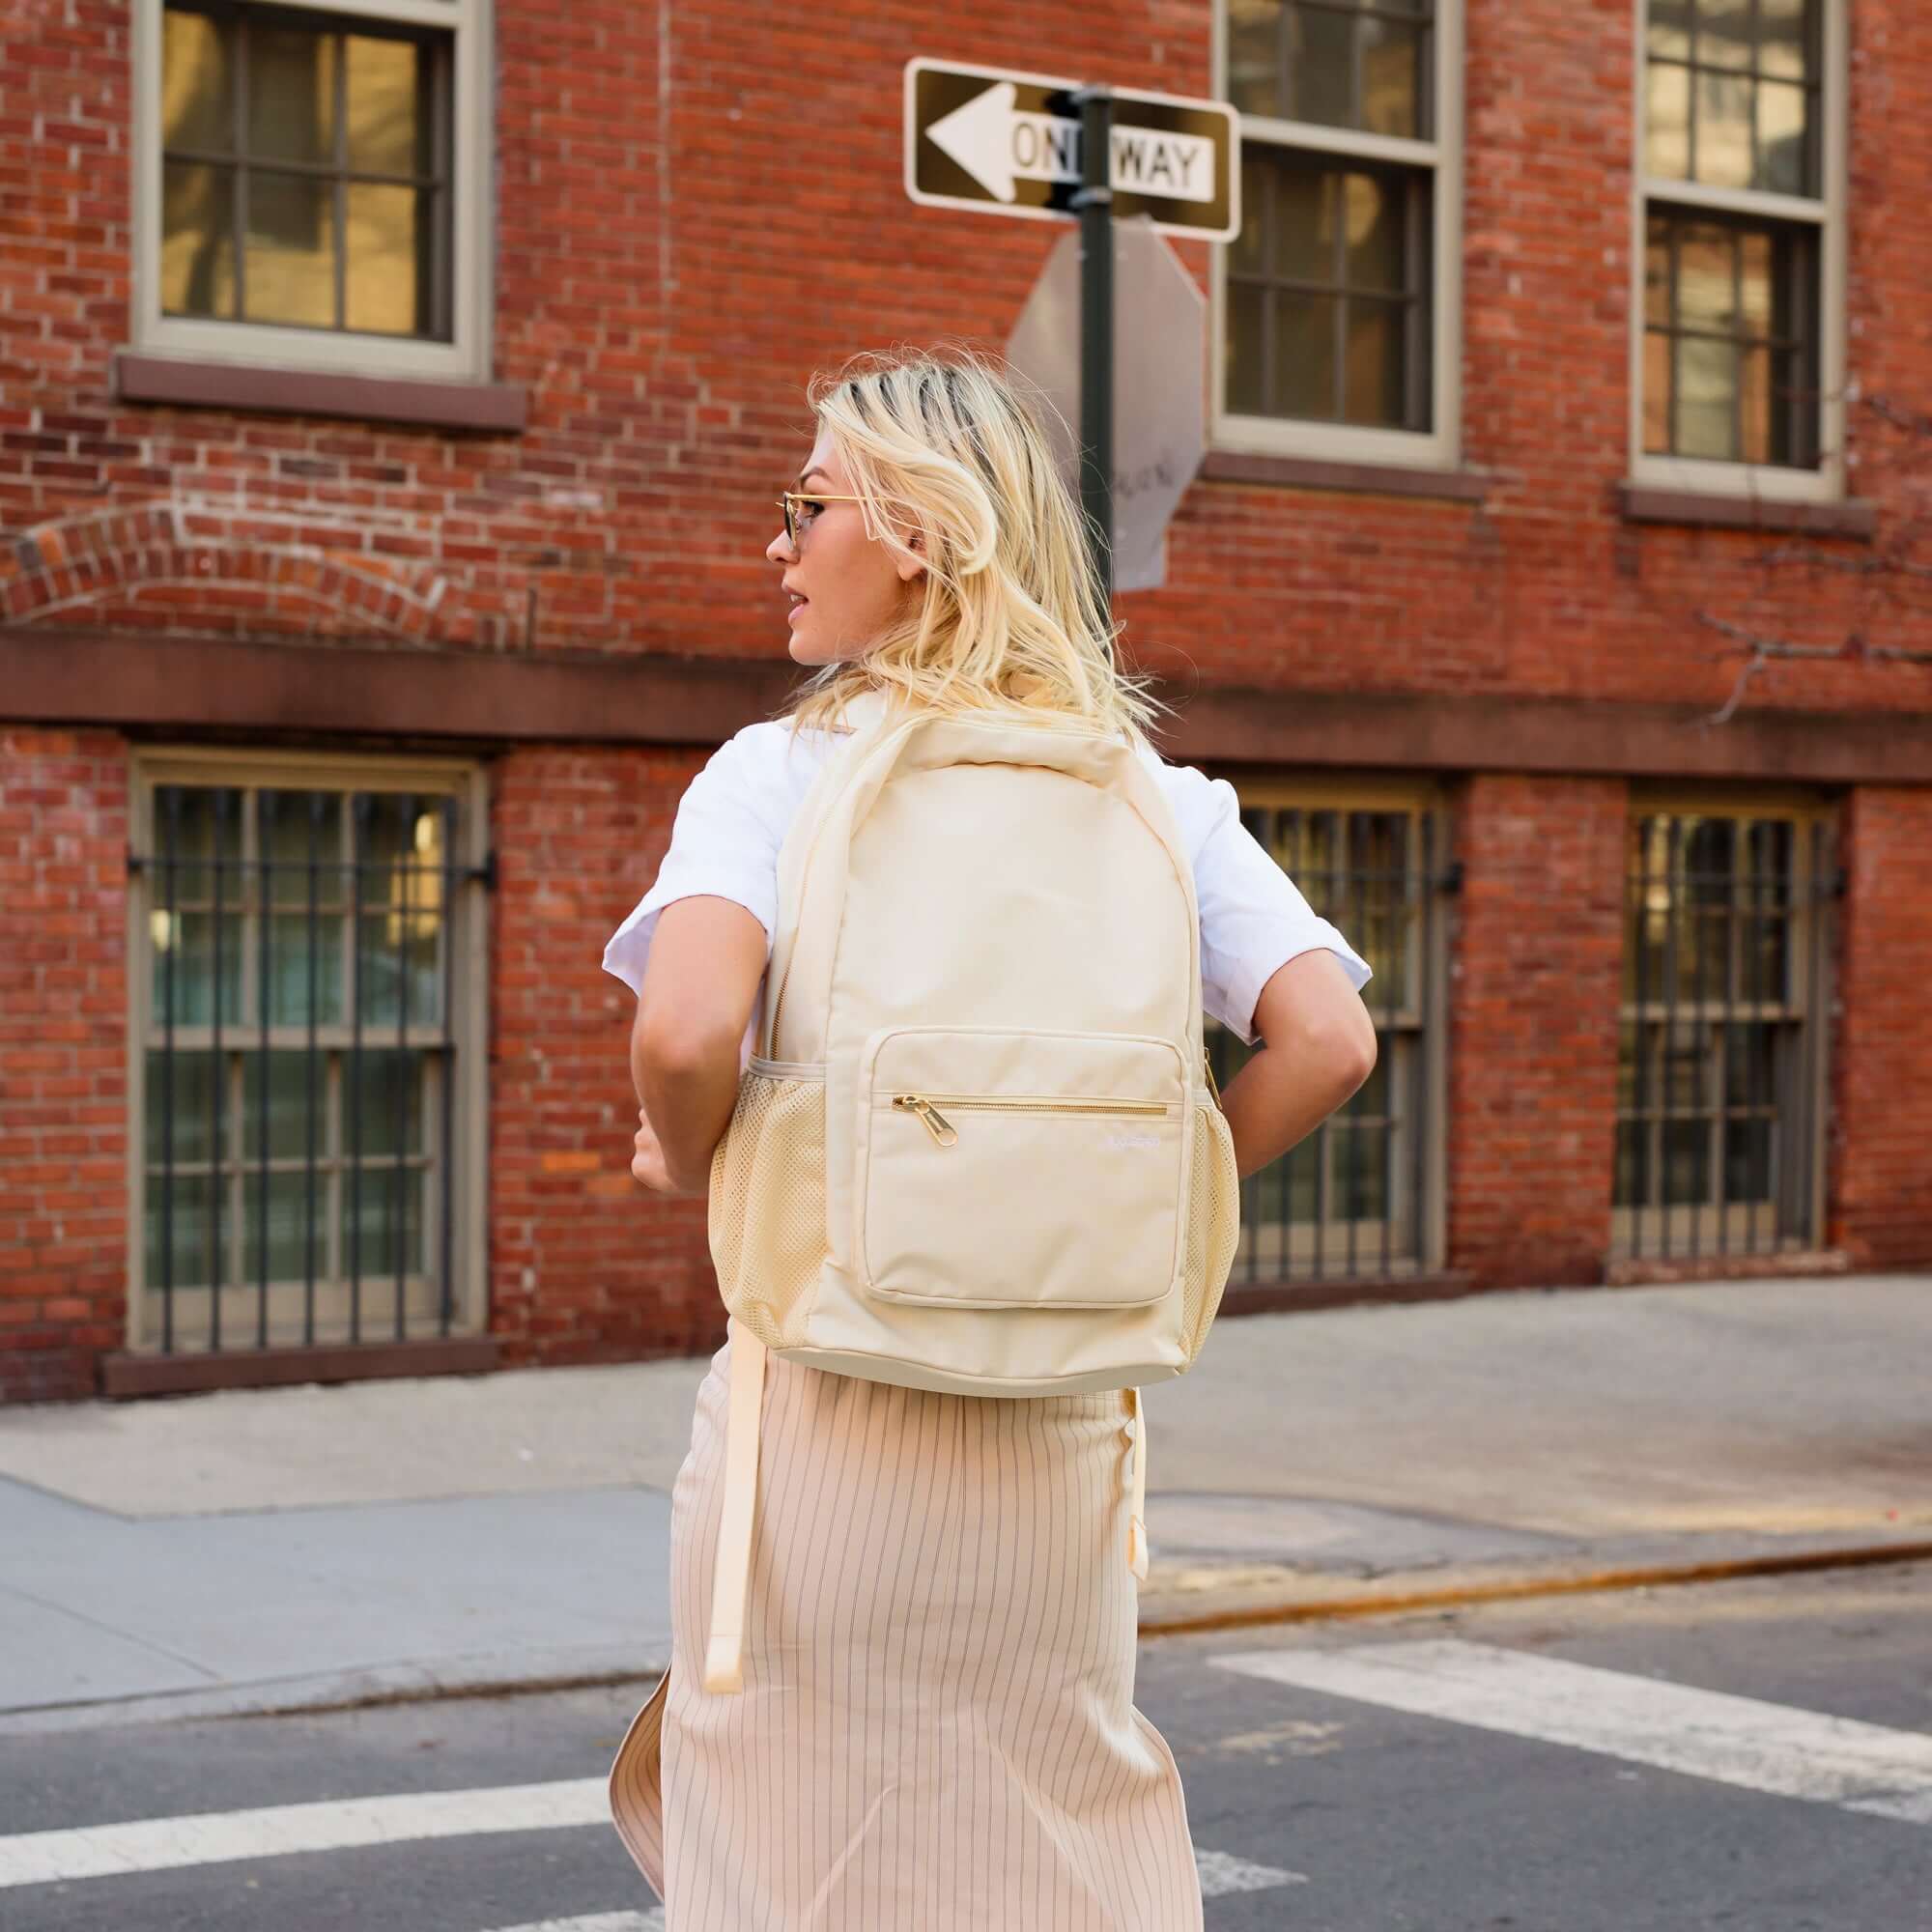 August Noa travel backpack in cream. Front view on a woman's back.